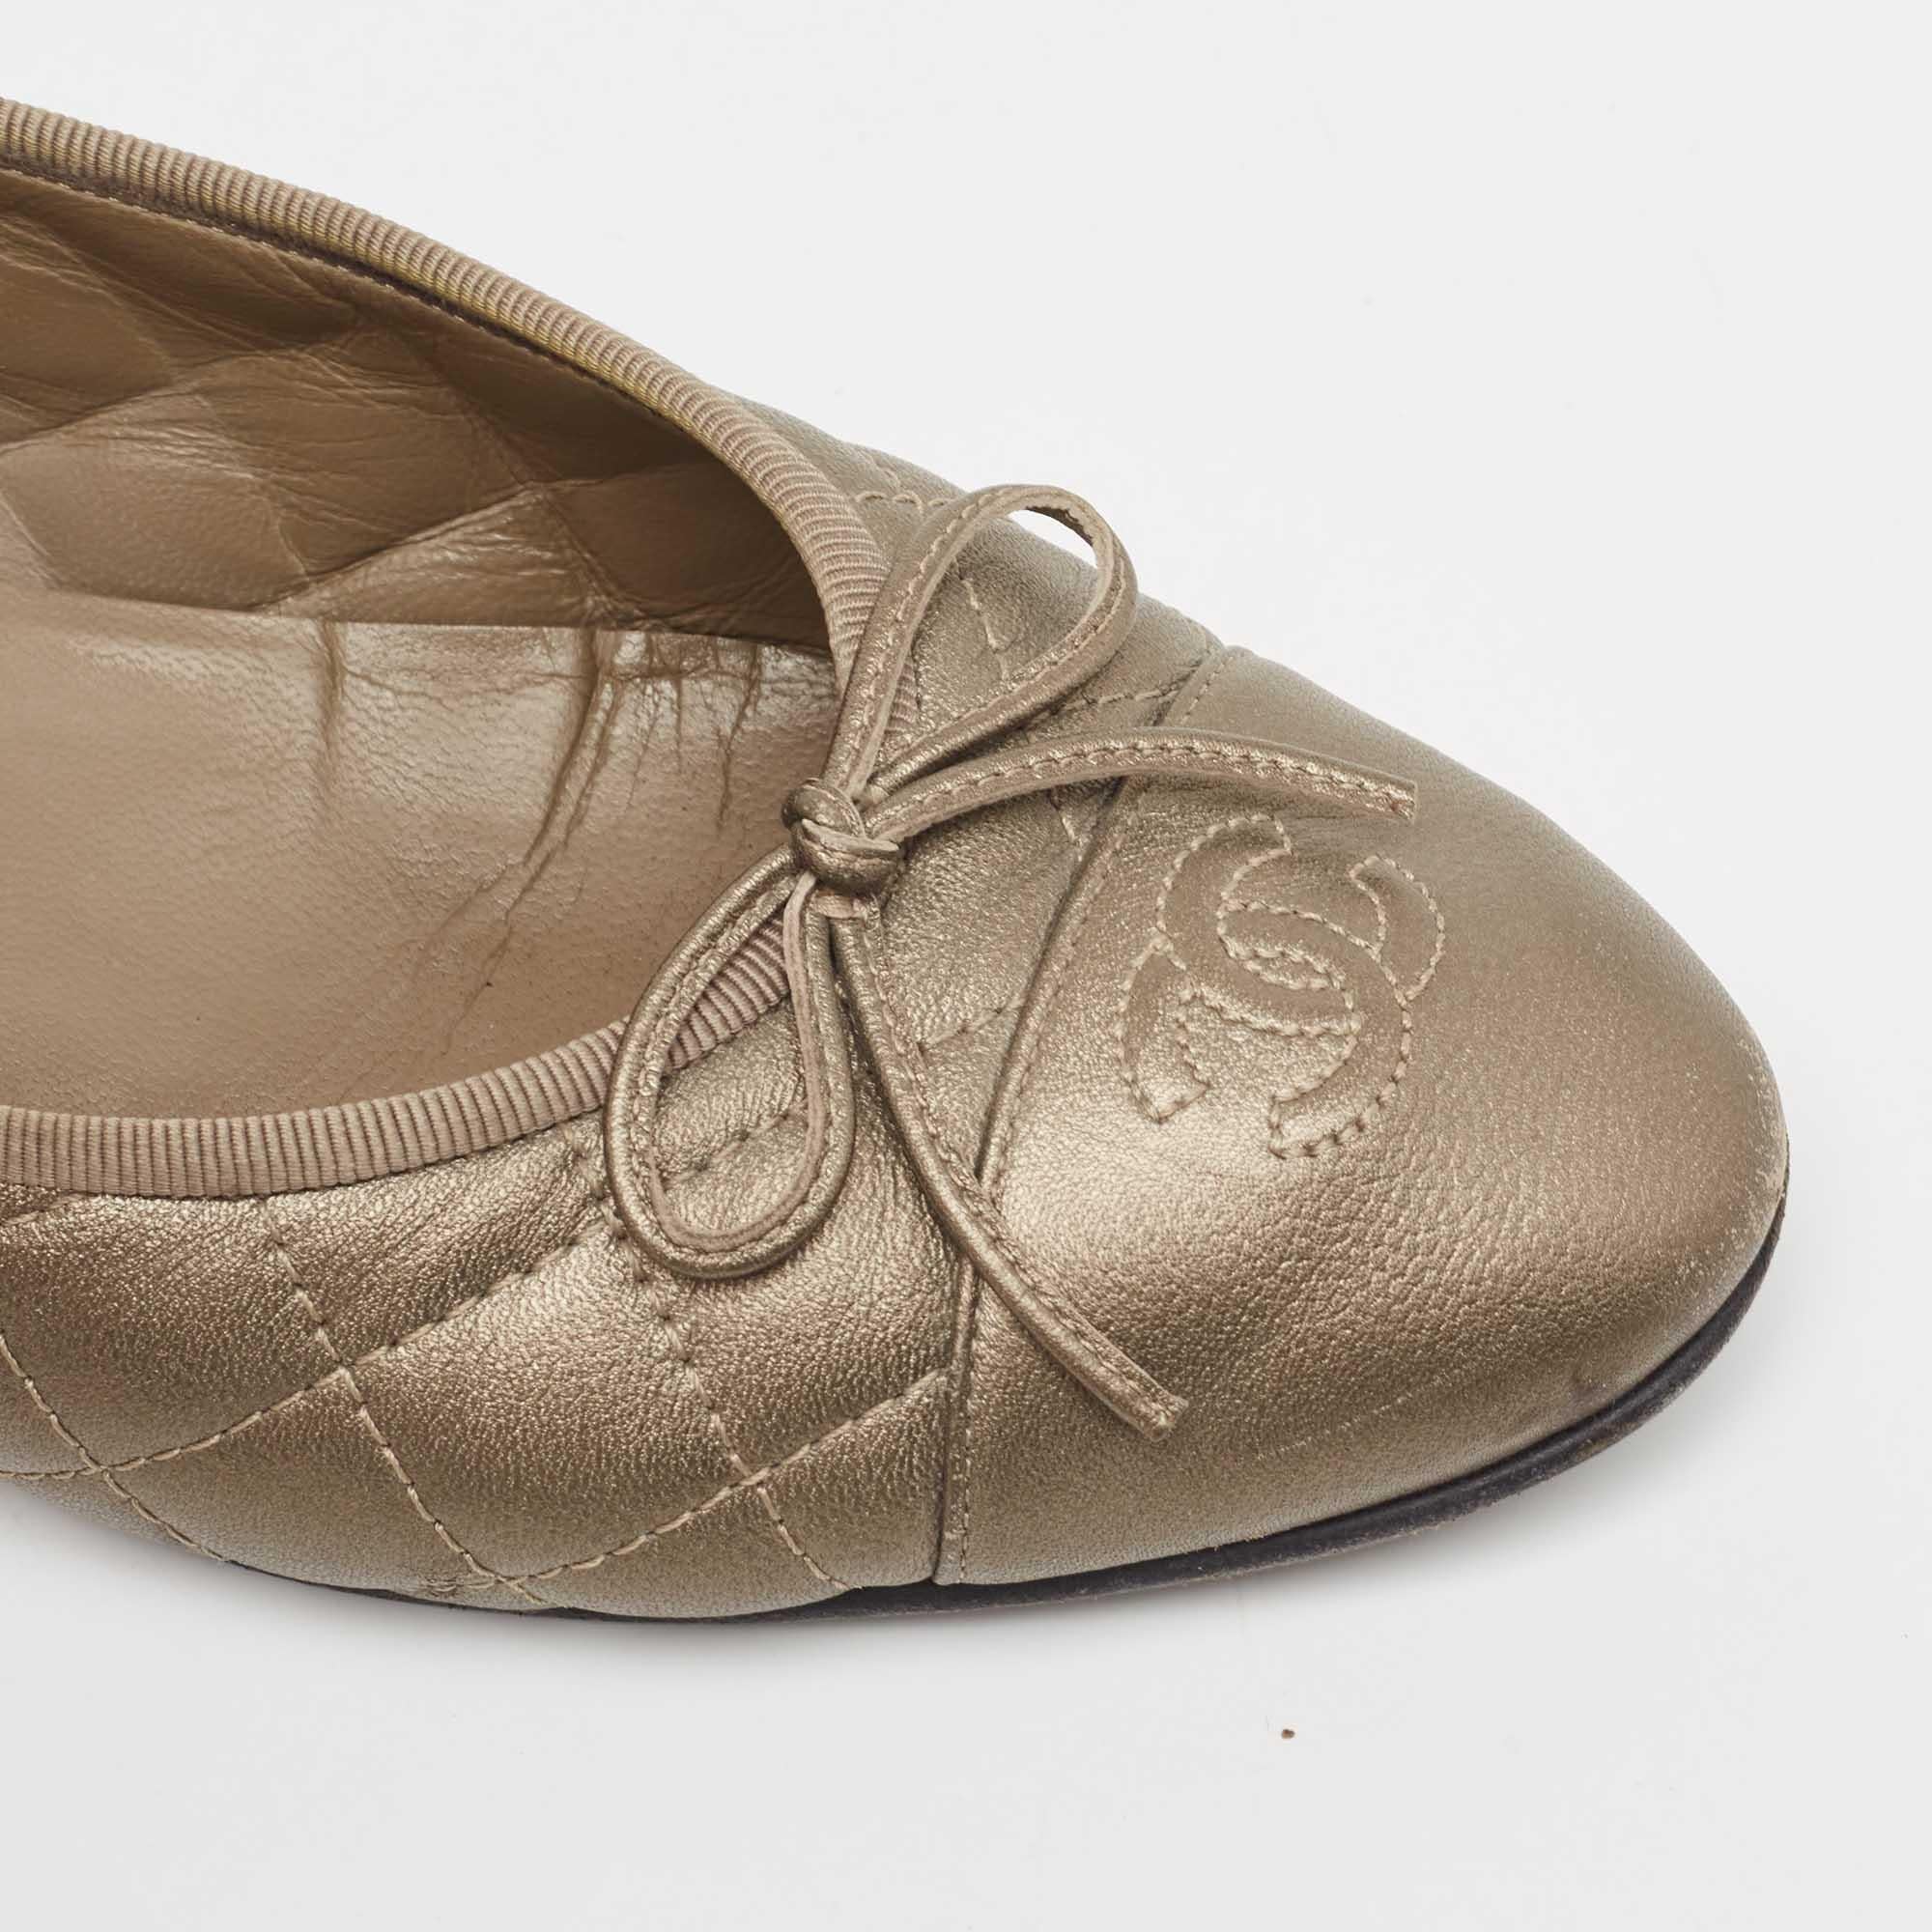 Chanel Metallic Quilted Leather Bow CC Cap Toe Ballet Flats Size 40 3